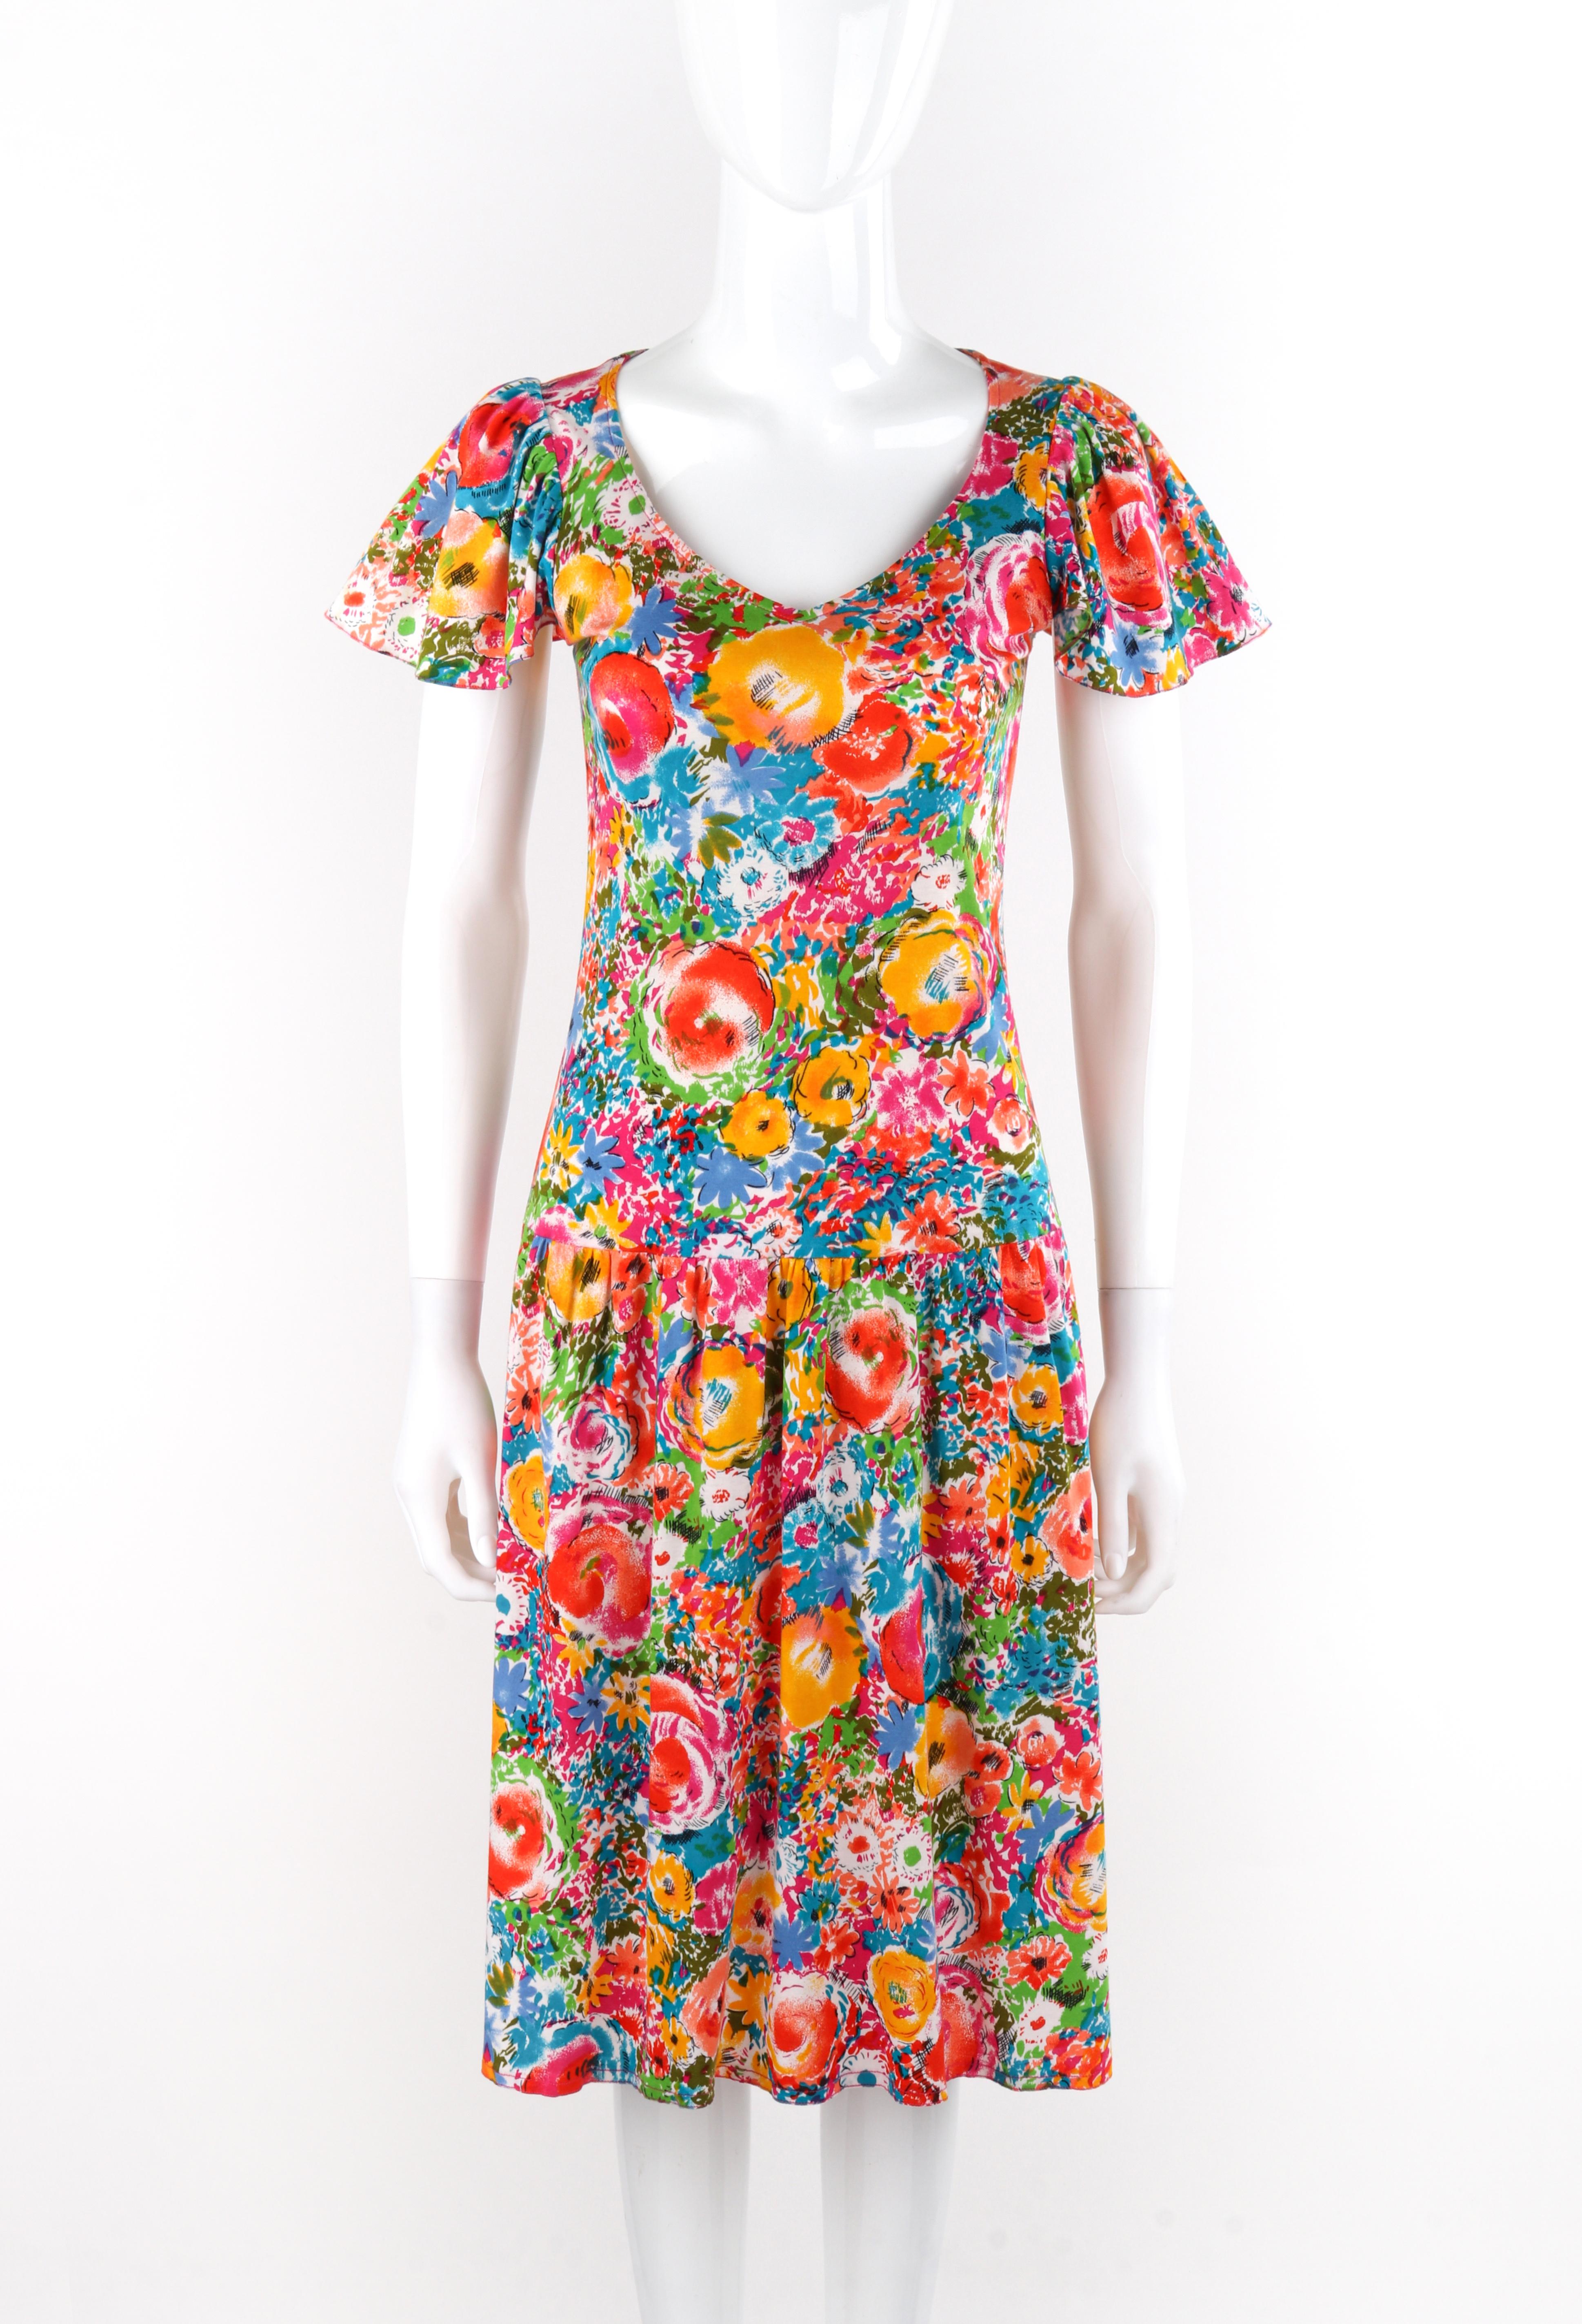 Brand / Manufacturer: Renee Helga Howie
Circa: 1980s 
Style: Drop waist knee-length dress
Color(s): Shades of black, white, red, orange, yellow, green, blue, purple, pink
Lined: No
Marked Fabric Content: 